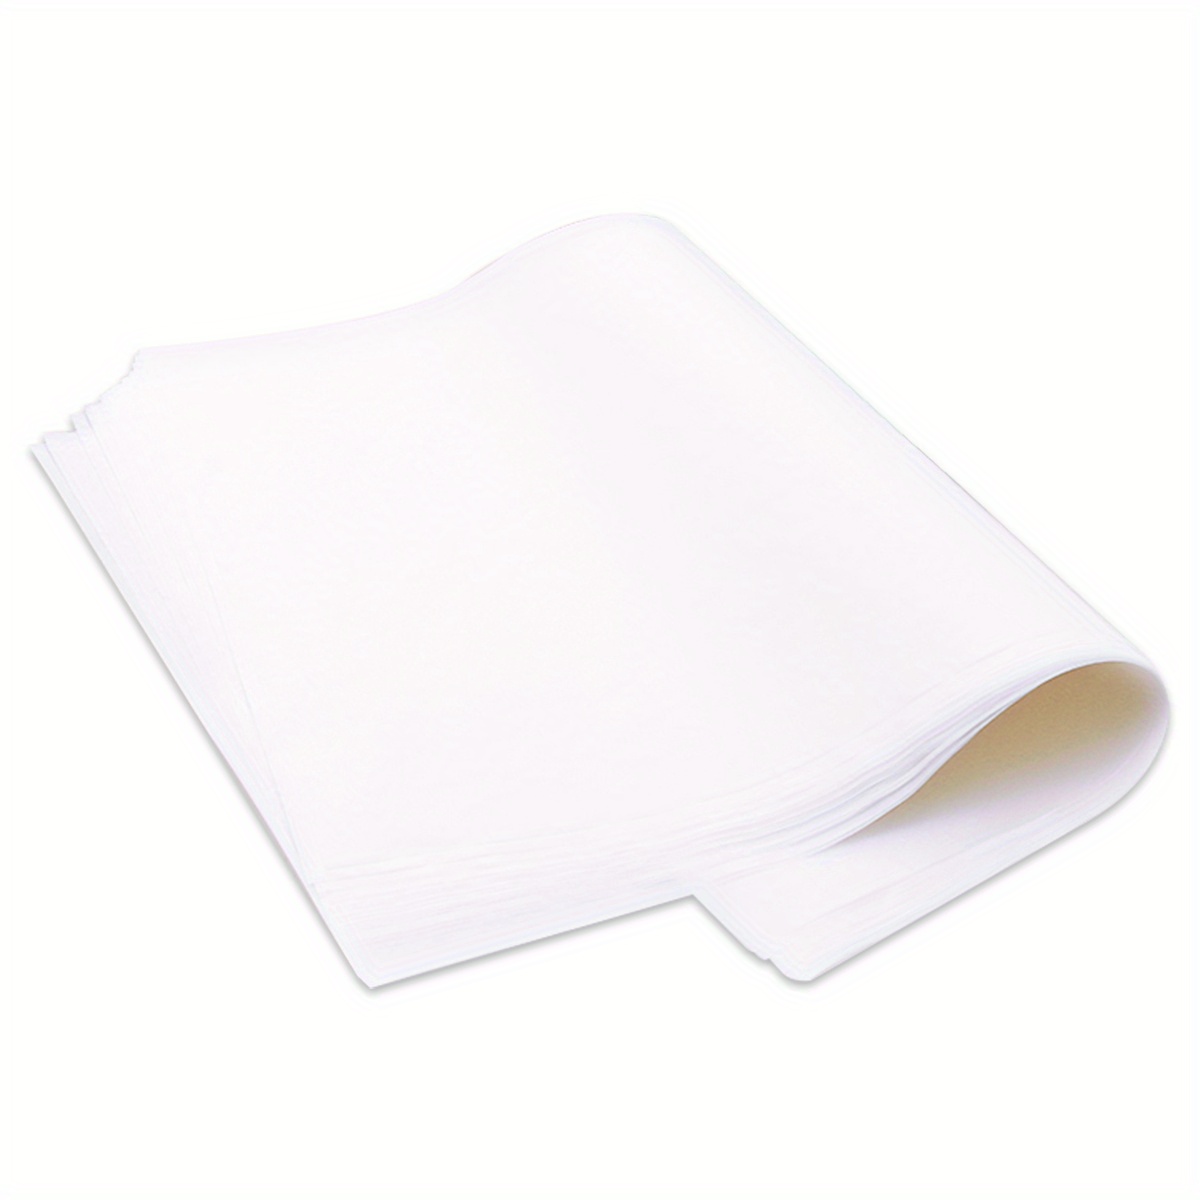 Baking Paper Heavy Duty, Greaseproof Paper Sheets, Non Stick